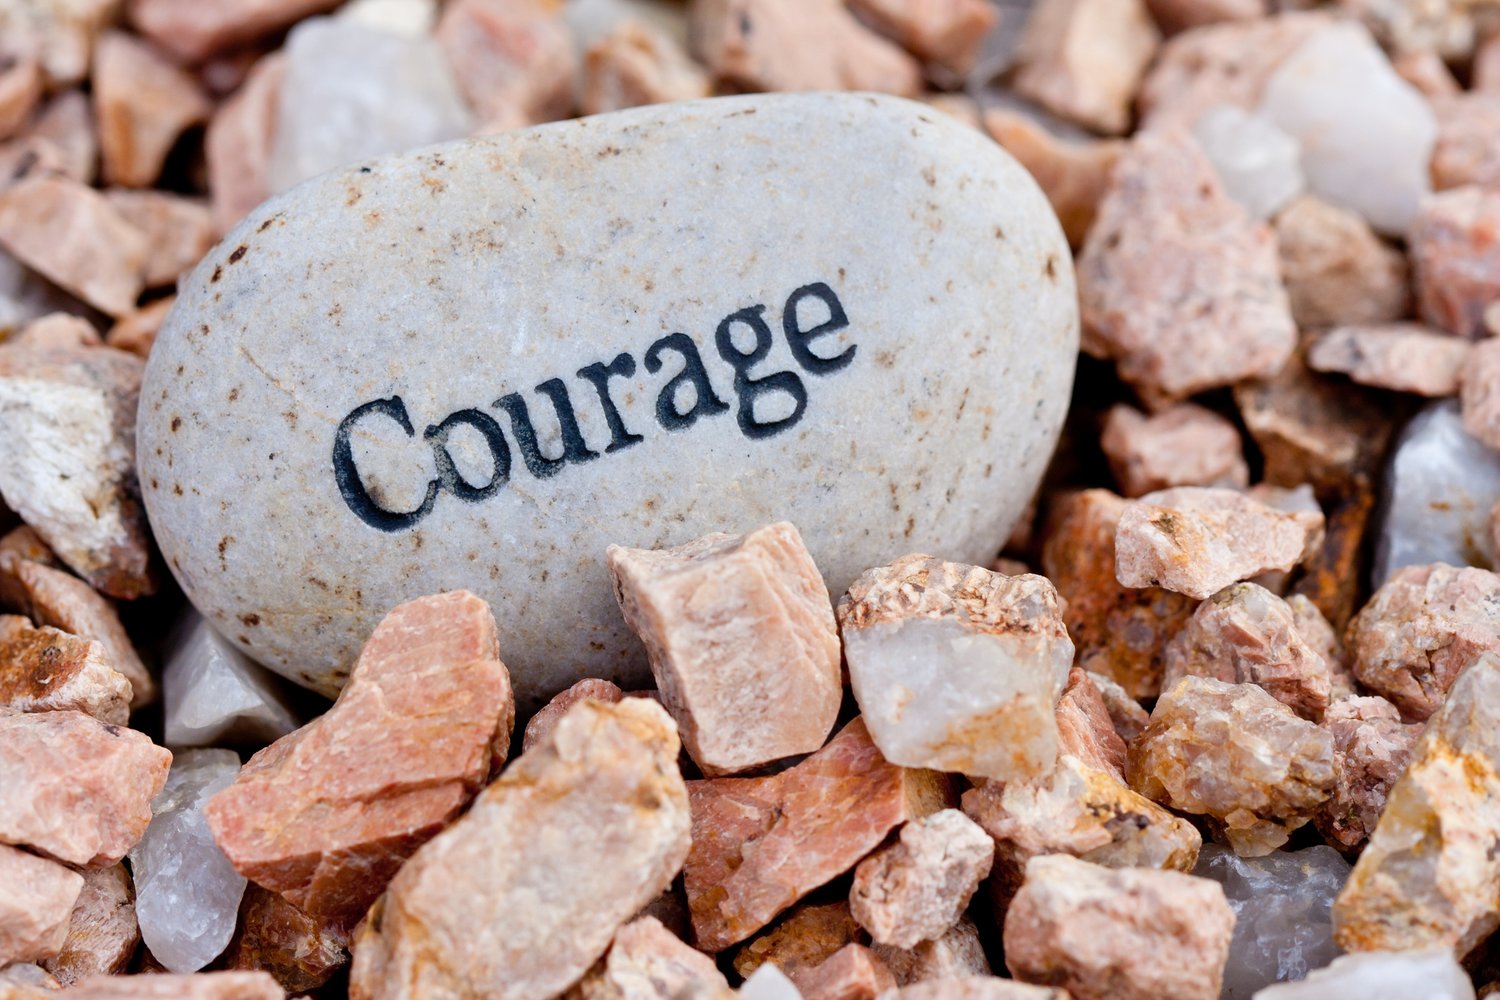 Image result for courage